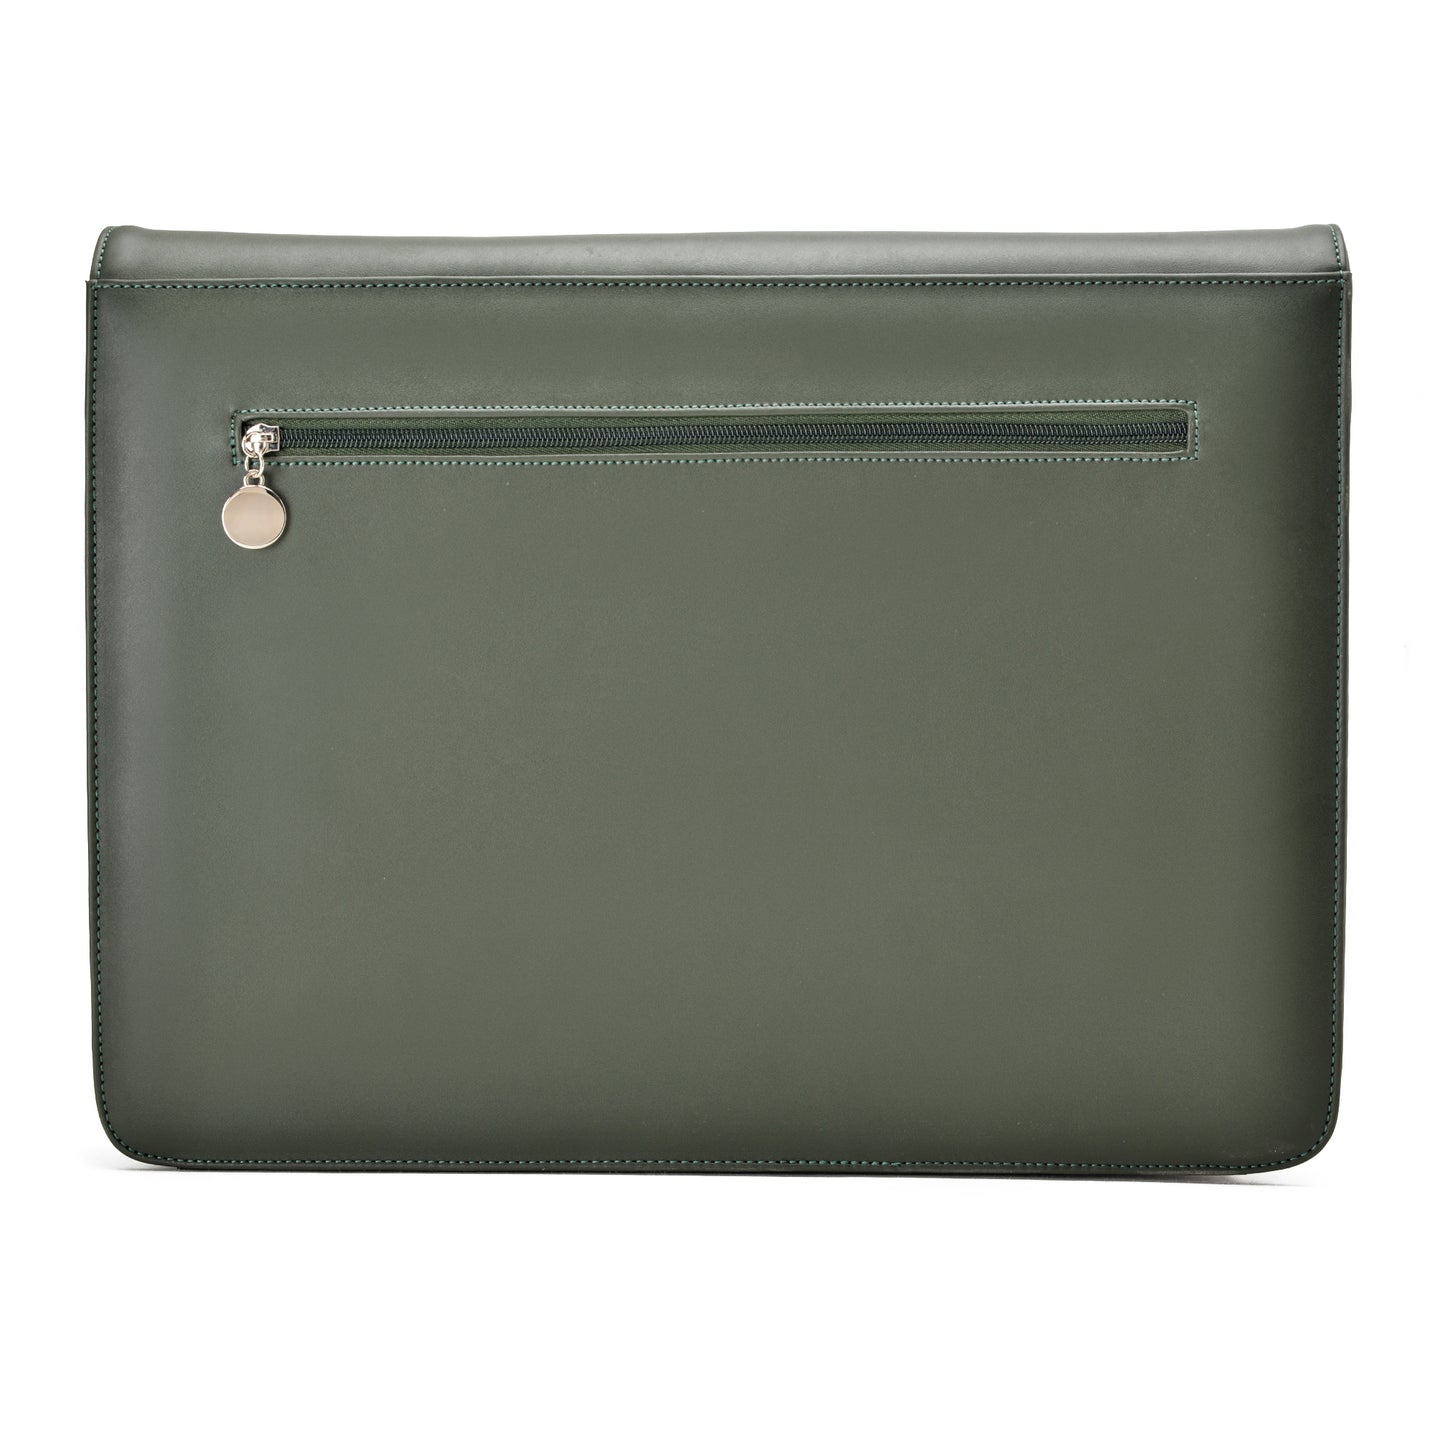 Laptop Bag/Sleeve Olive Green with Multi colour Fabric- Code 102